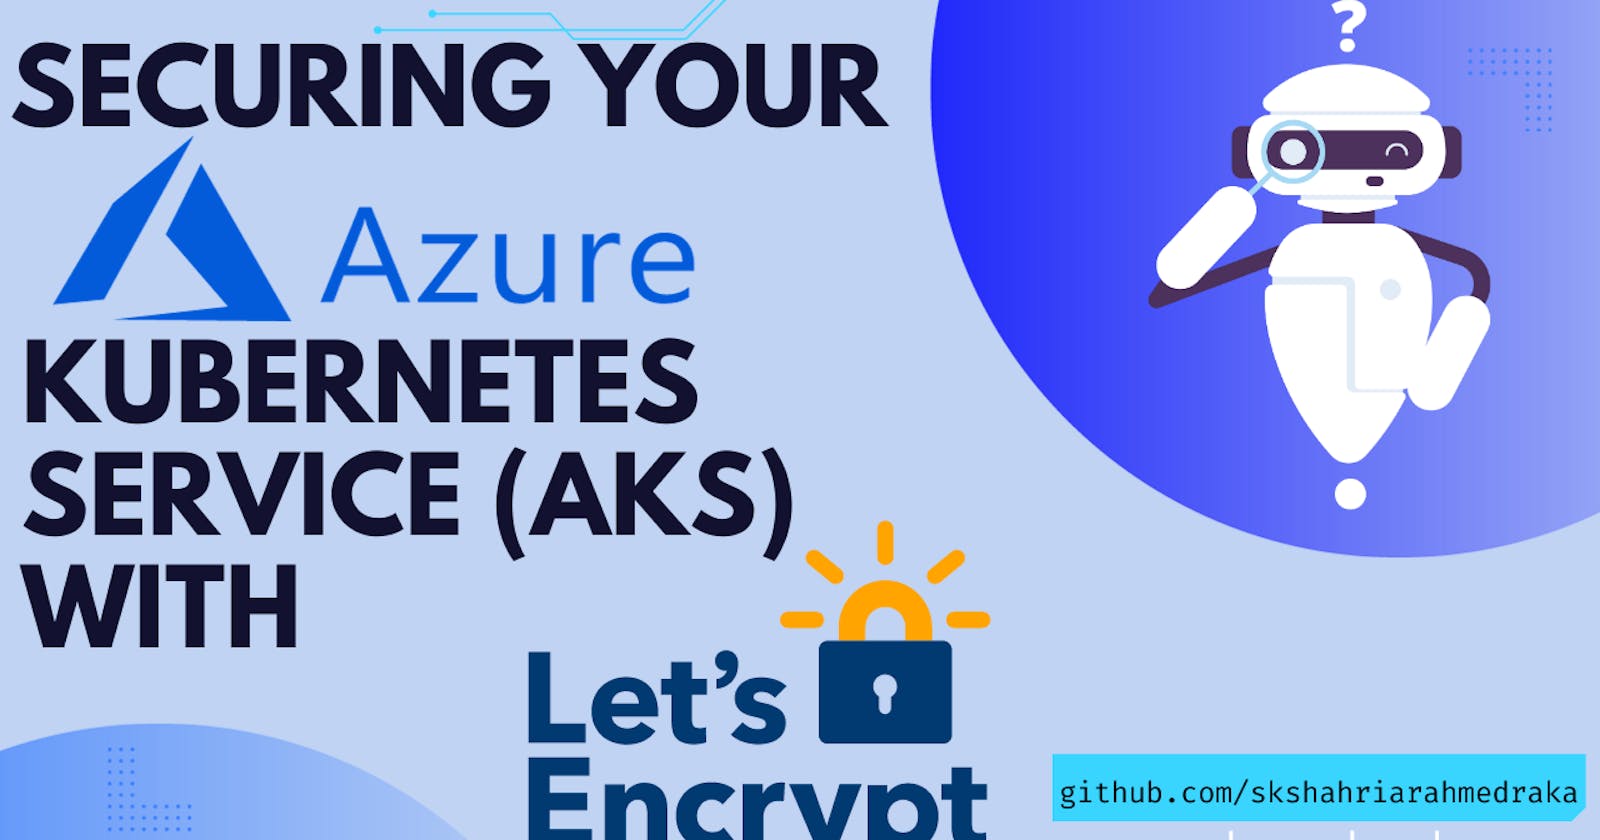 Securing Your Azure Kubernetes Service (AKS) with Let's Encrypt: A Step-by-Step Guide